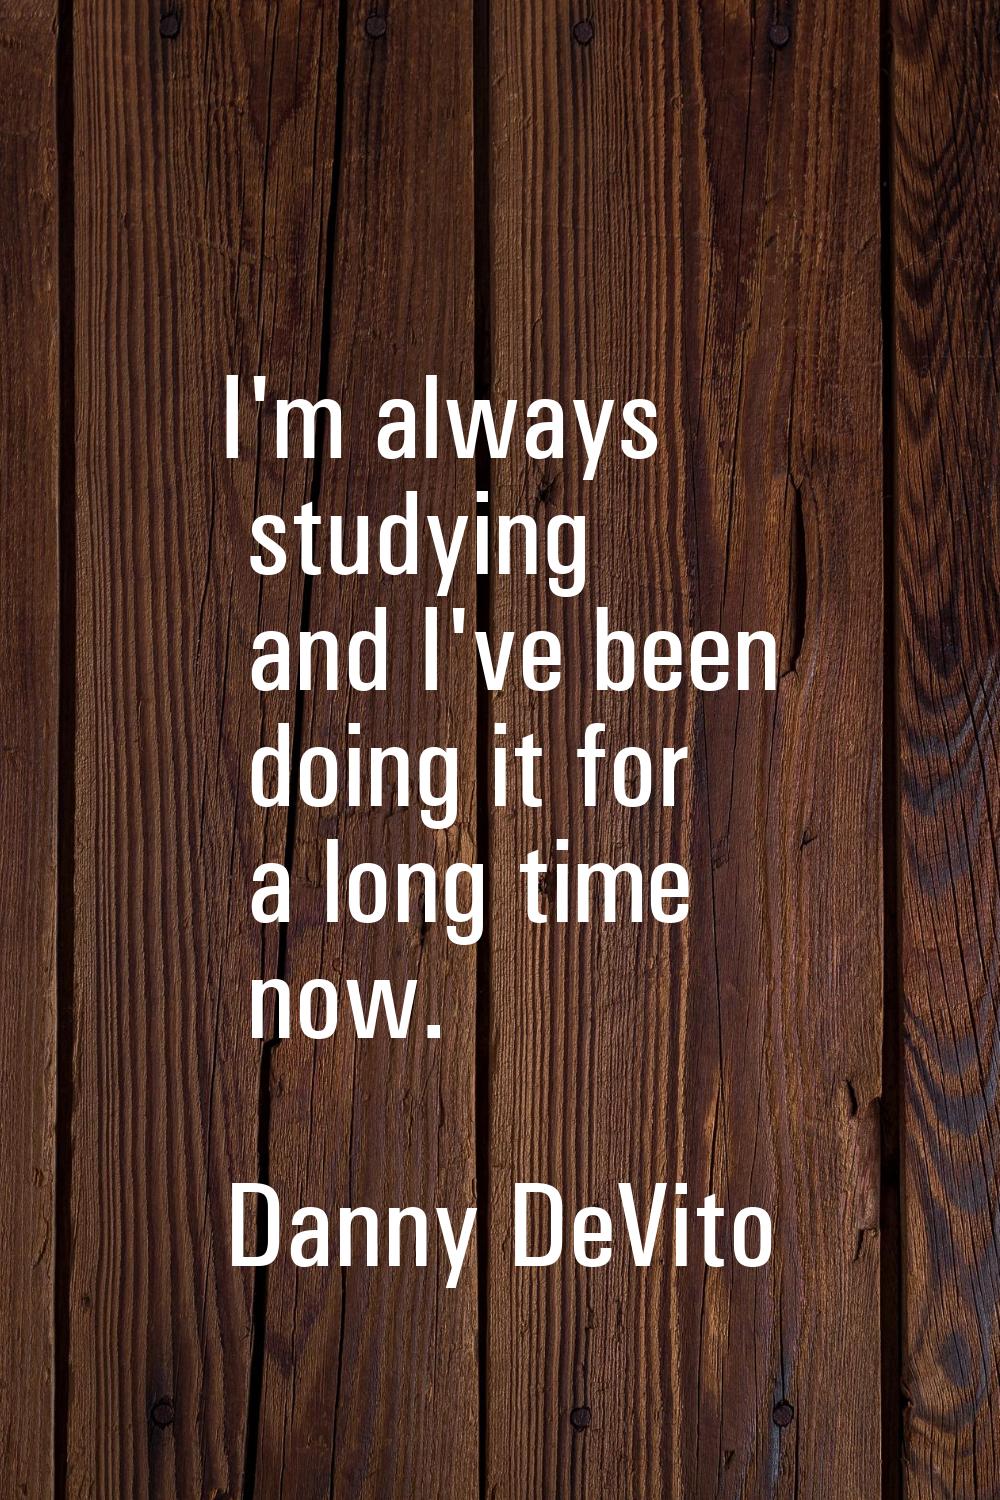 I'm always studying and I've been doing it for a long time now.